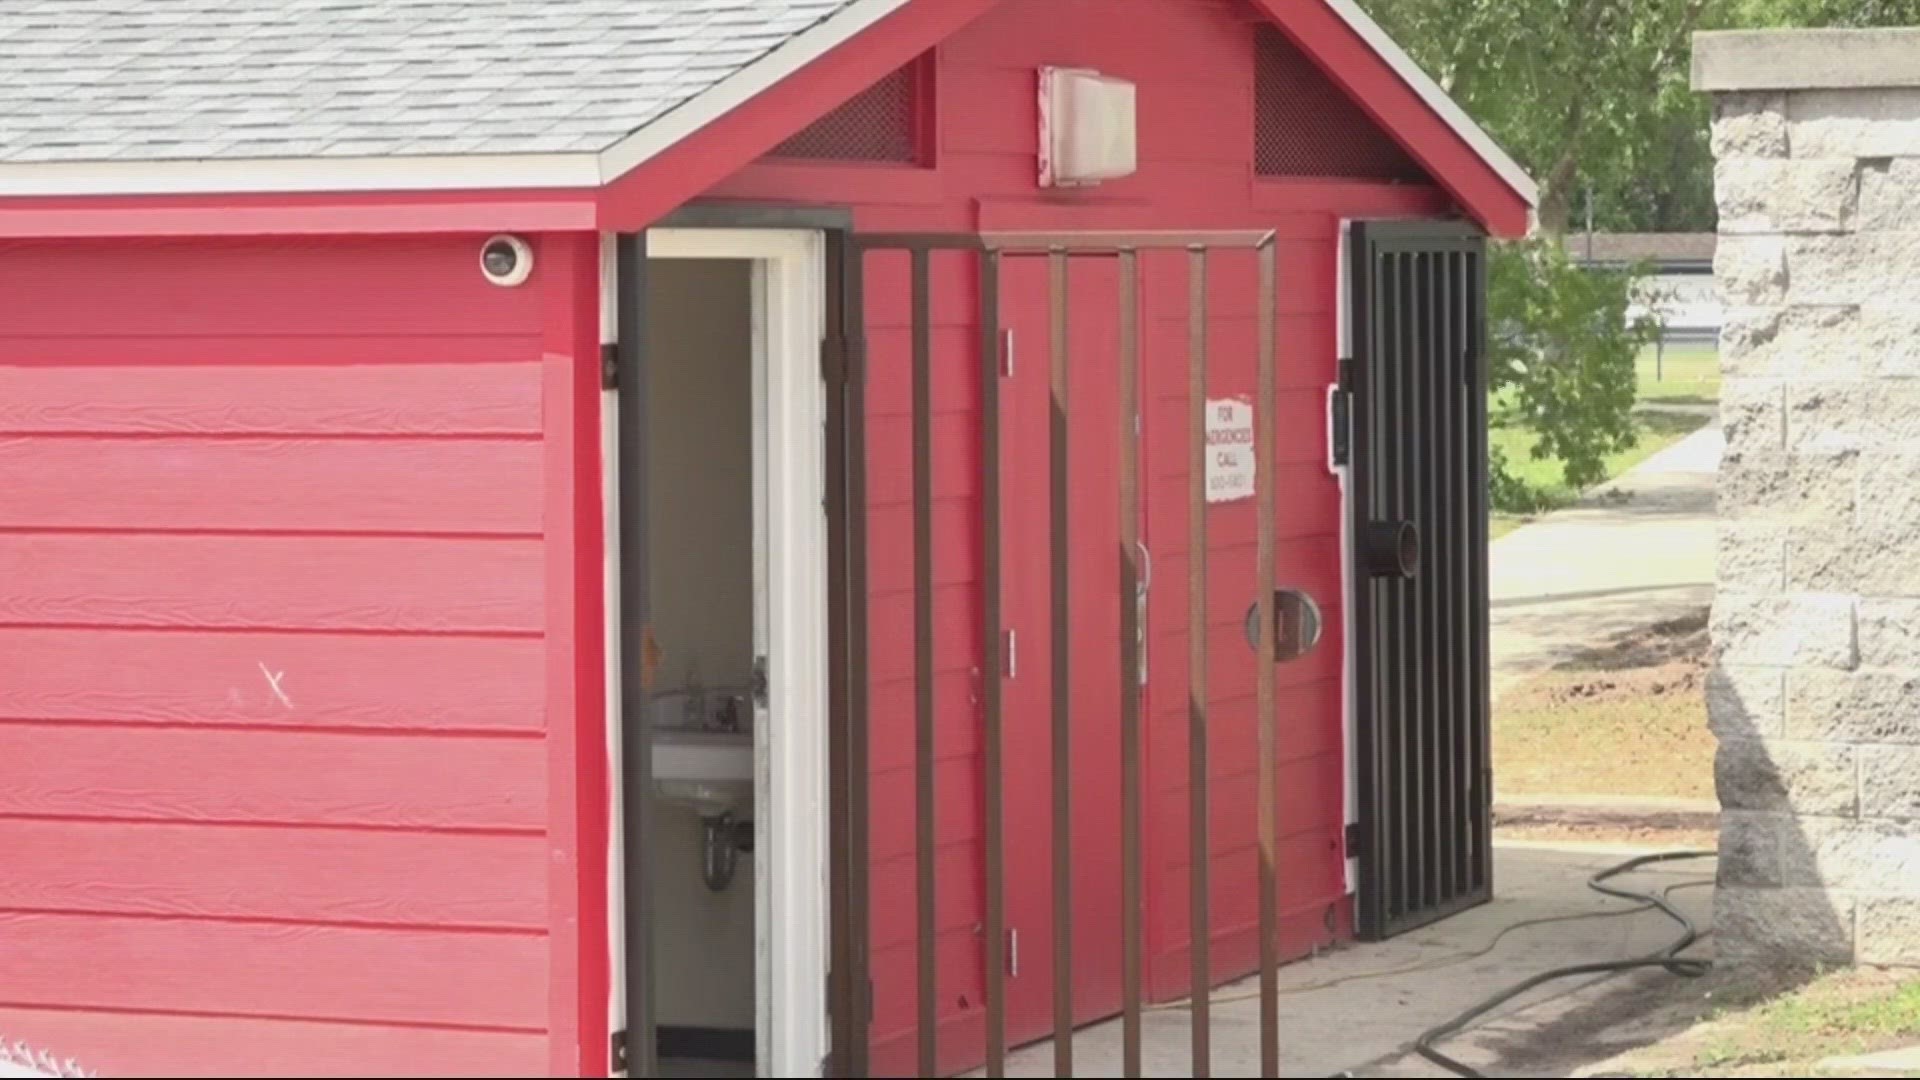 The Argyle Athletic Association says the porta-potties are unsanitary and unacceptable.